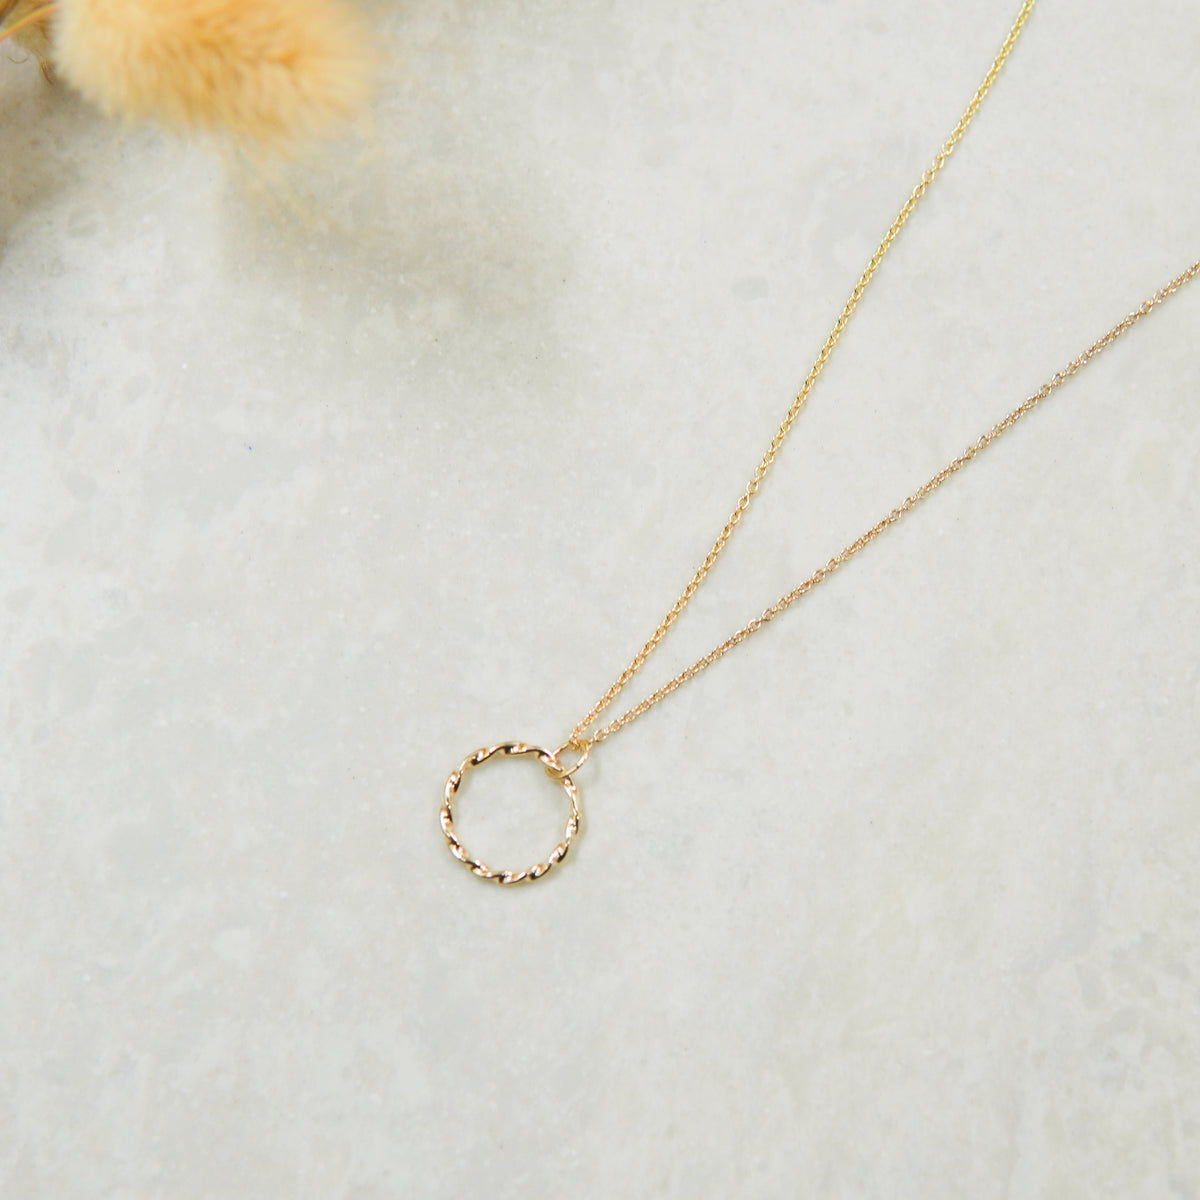 Golden Twisted Ring Diamond Necklace